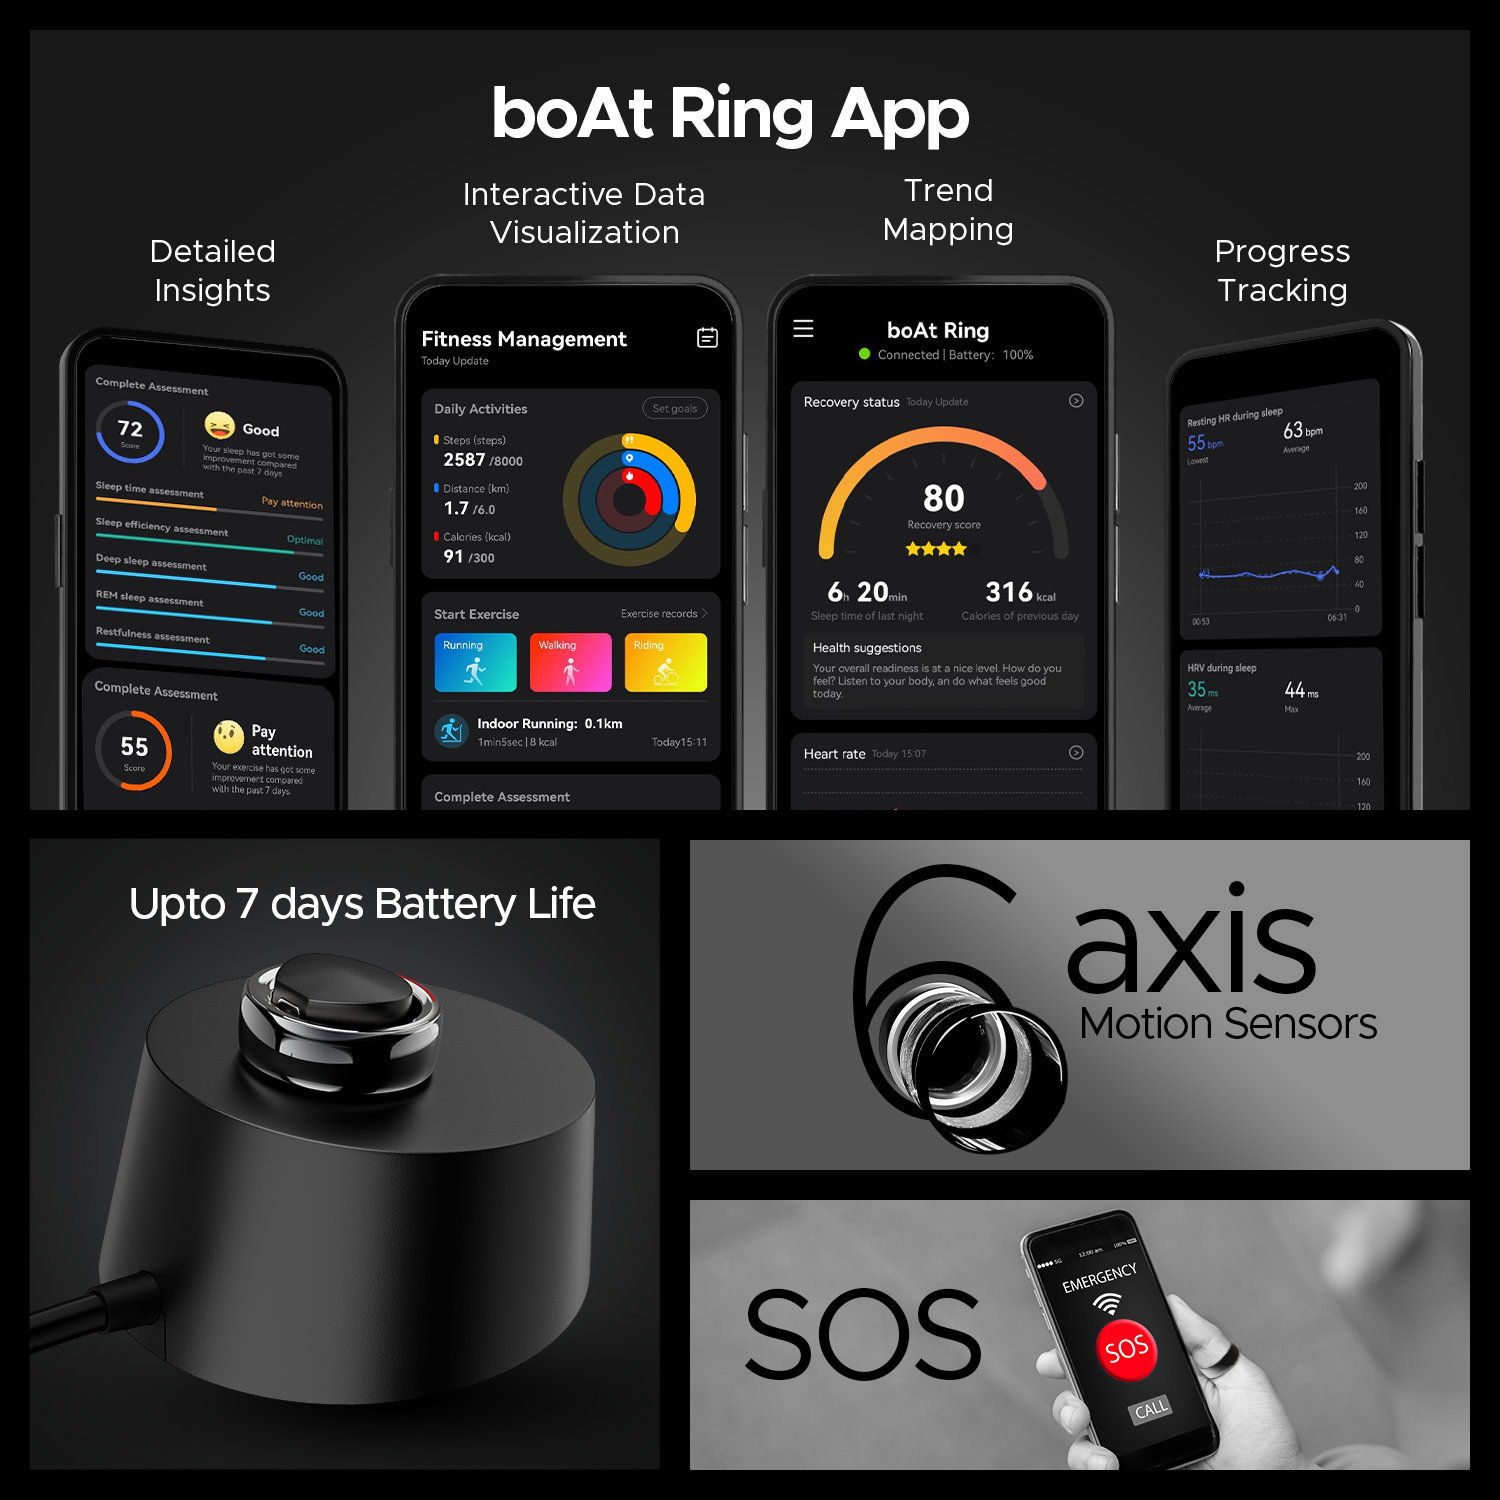 Boat Smart Ring Price, Specs, Features, Health Features -- Check All Here |  Technology & Science News, Times Now